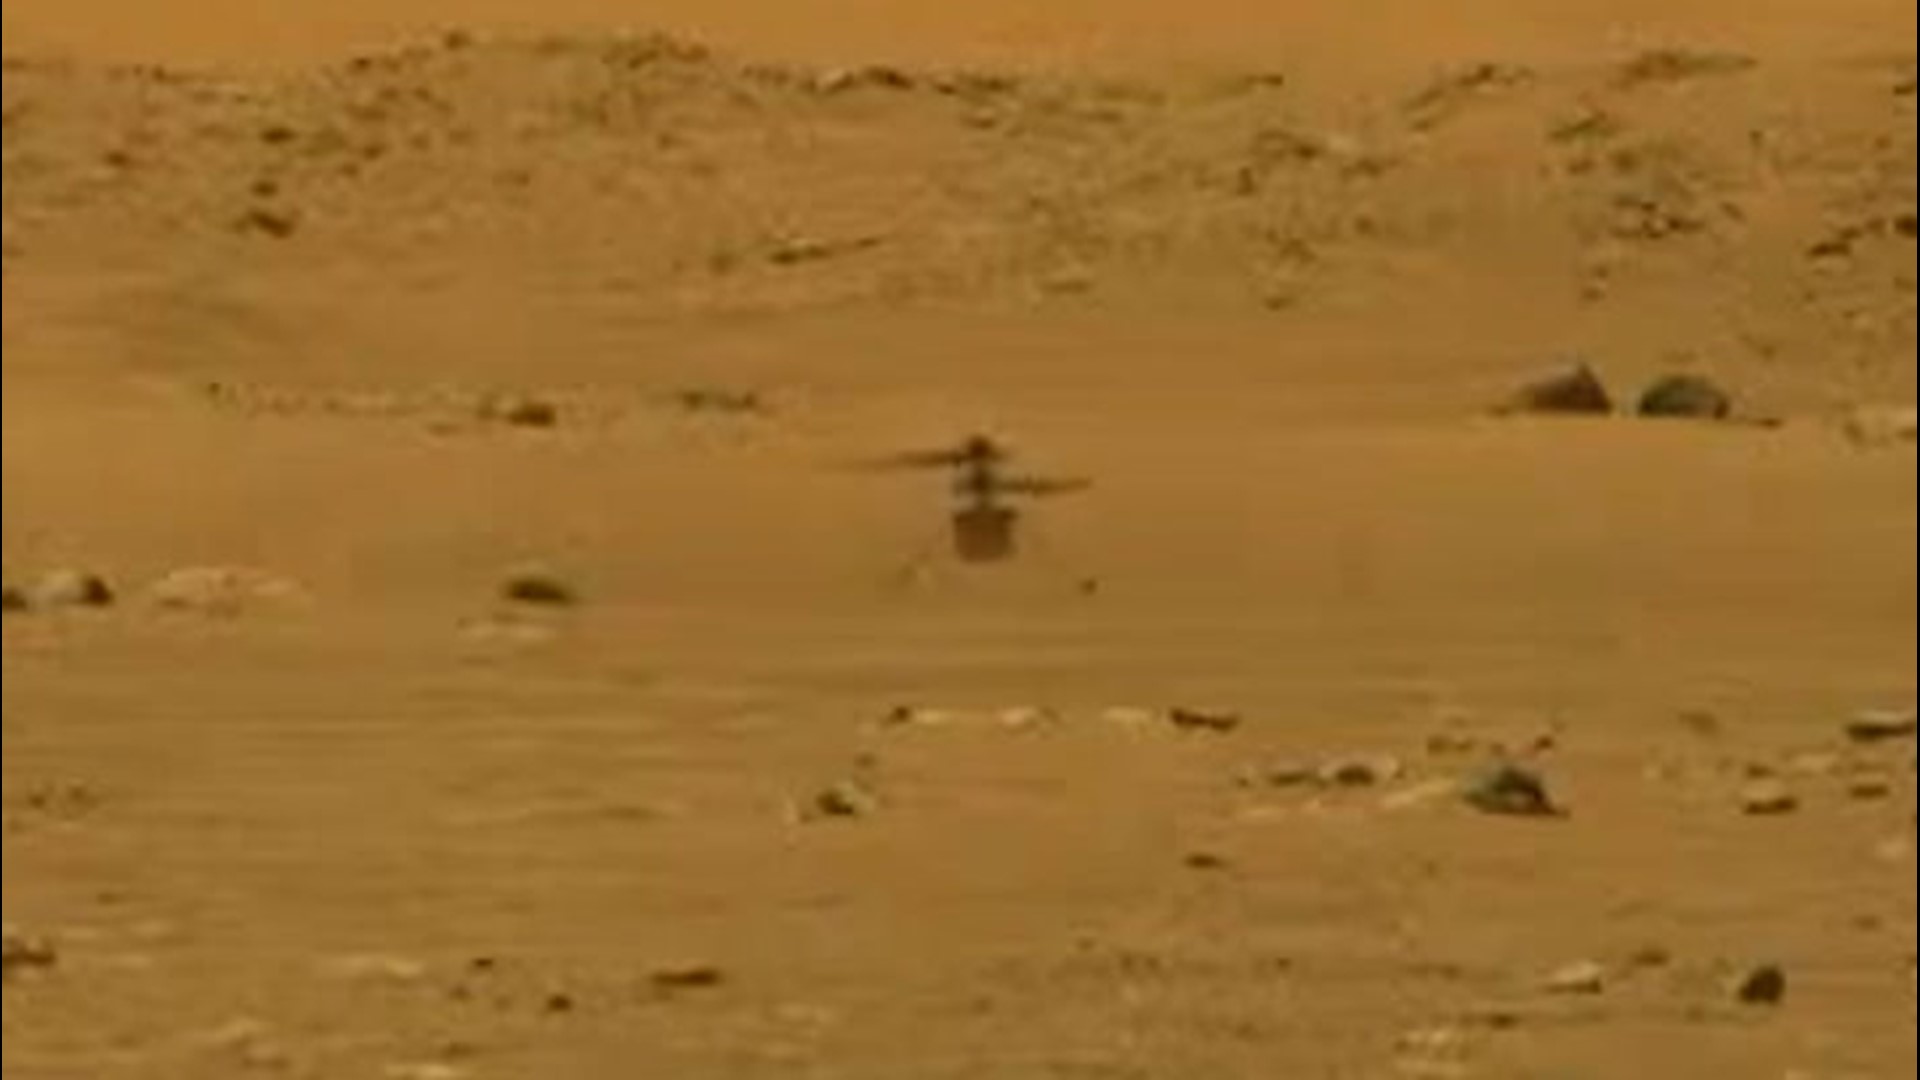 History was made on the Red Planet, as NASA confirms the Mars Ingenuity helicopter to become the first man-made craft to ever fly on another planet on April 19.